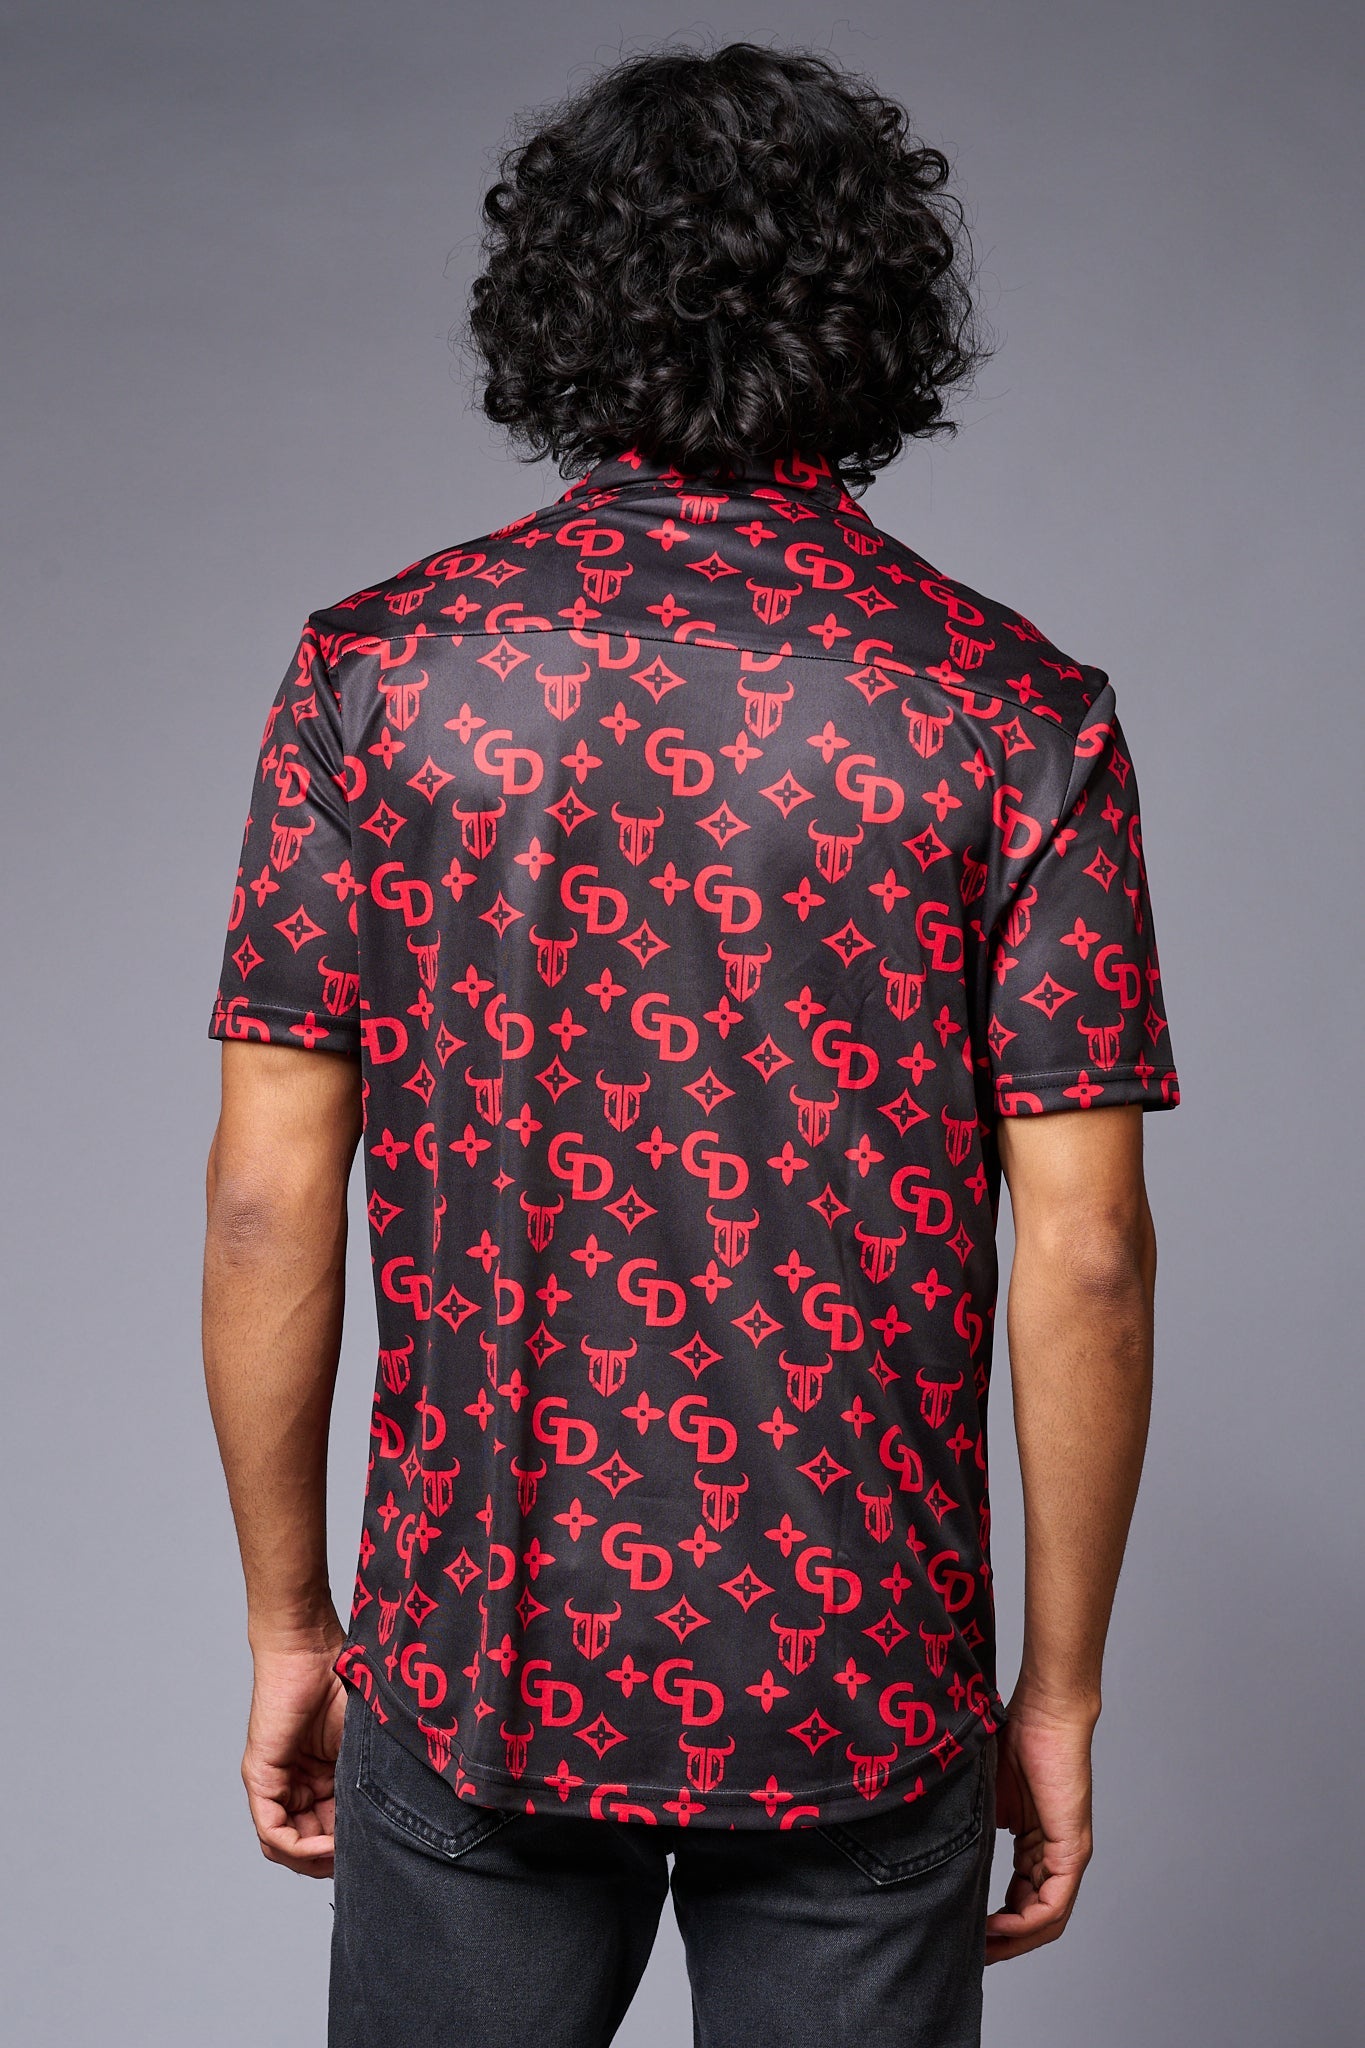 GD with Logo (in Red) Printed Black Shirt for Men - Go Devil